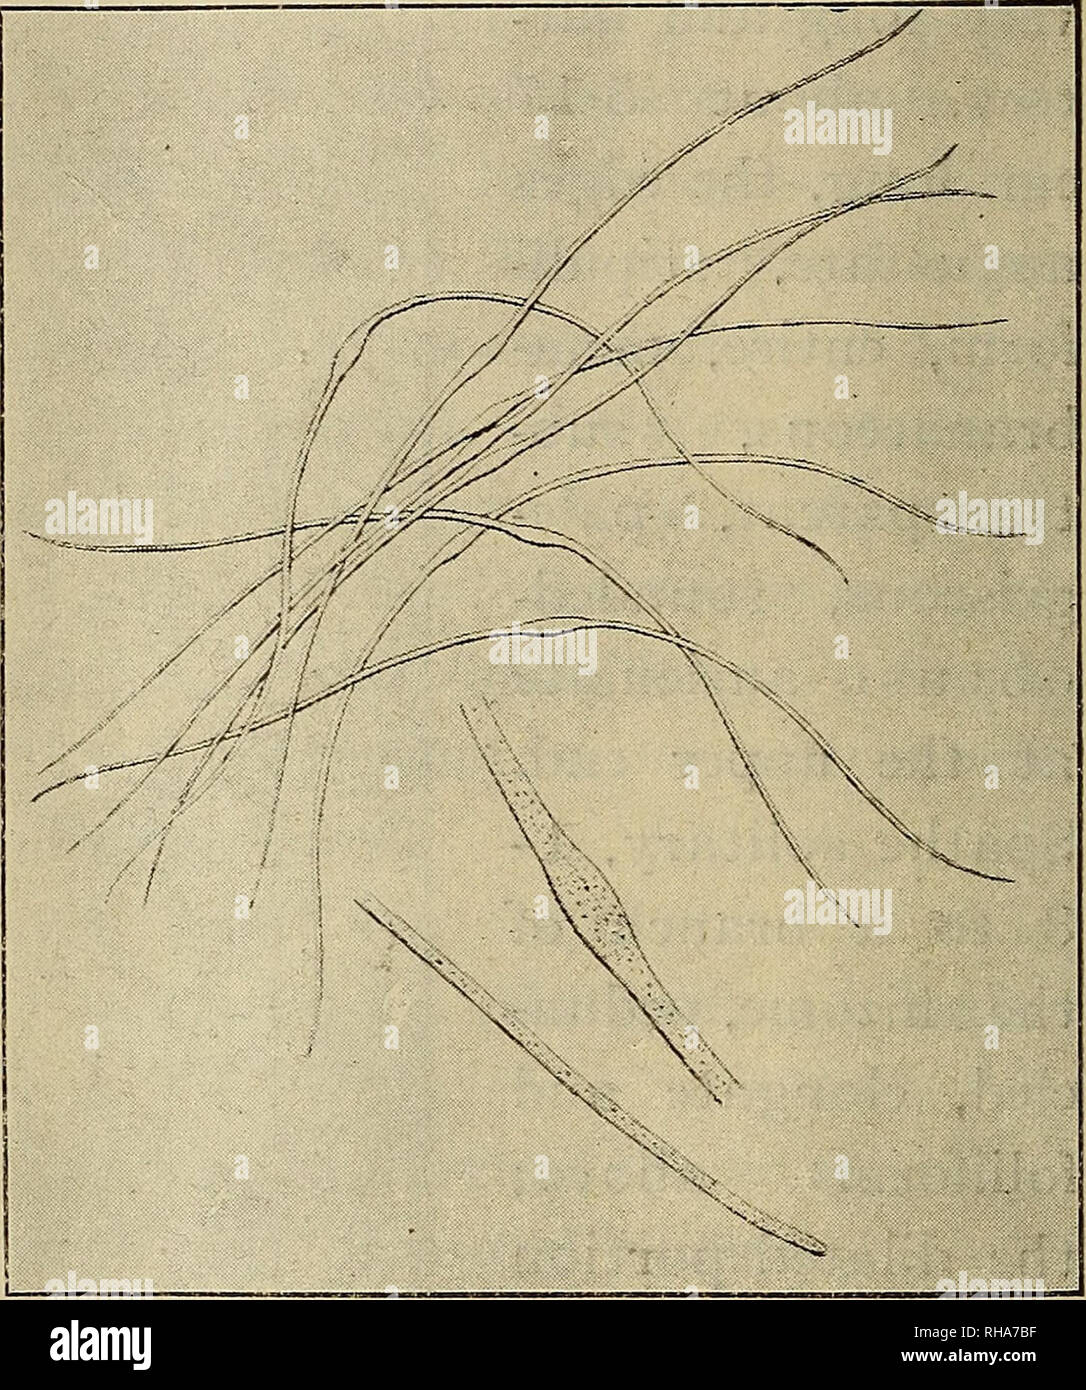 . The botanical magazine = Shokubutsugaku zasshi. Plants; Botany. 106 THE BOTANICAL MAGAZINE. [Vol. XXIV. No. 280. placed ? pollen (Fig. XI. mag.) confervoid, fusiformly thicker in centre, numerous, dense, close, whitisli-lacteous, about If mm. long. Female flower : ovaries 8-11?stigmas 2, capillaceo- aristate, deciduous. Fruits sessile on the front face of spadix, coriaceous, subreniform-r o u n ded, sagittato-cordate at the base, flattened, vertically carinate dorsally, beaked with a very short persist- ent style in front above, about 5mm. long ?lobes obtuse, half as long as the body. Nom. J Stock Photo